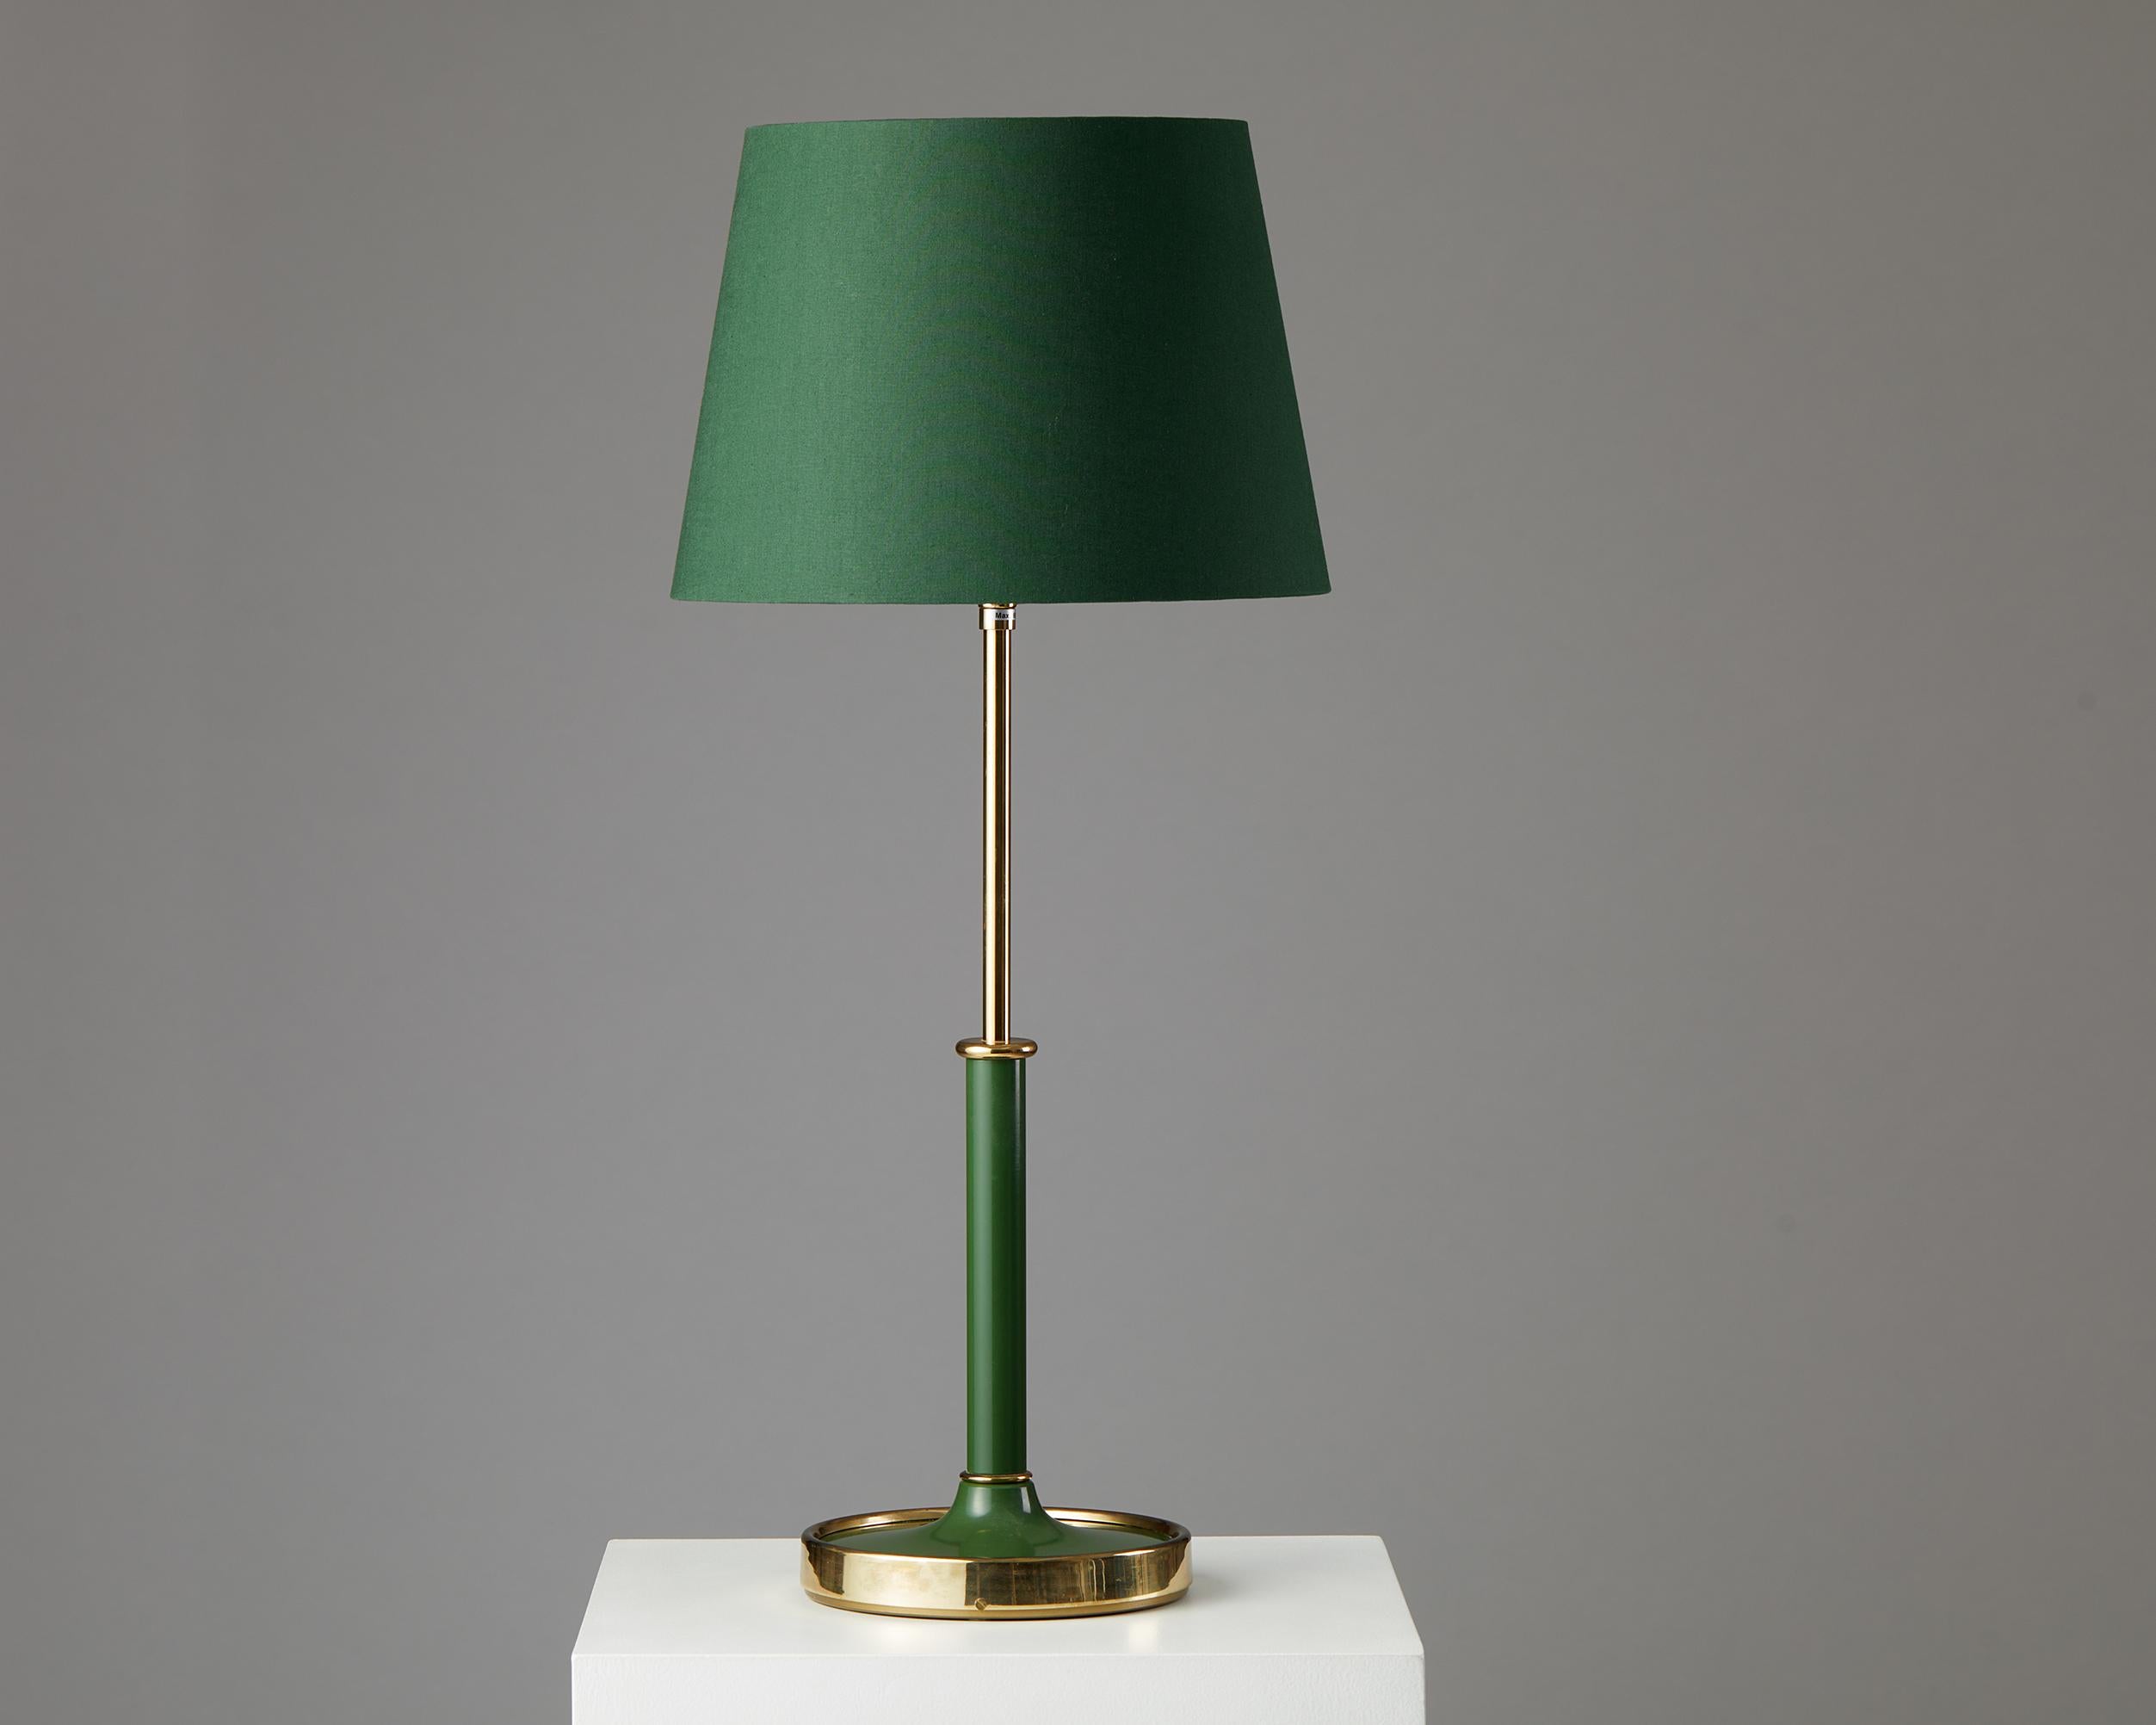 Table lamp model 2466 designed by Josef Frank for Svenskt Tenn,
Sweden, 1950s.
Brass, lacquered metal and fabric shade.

This delightful lacquered brass table lamp in a warm green tone is incredibly well proportioned. Josef Frank created three